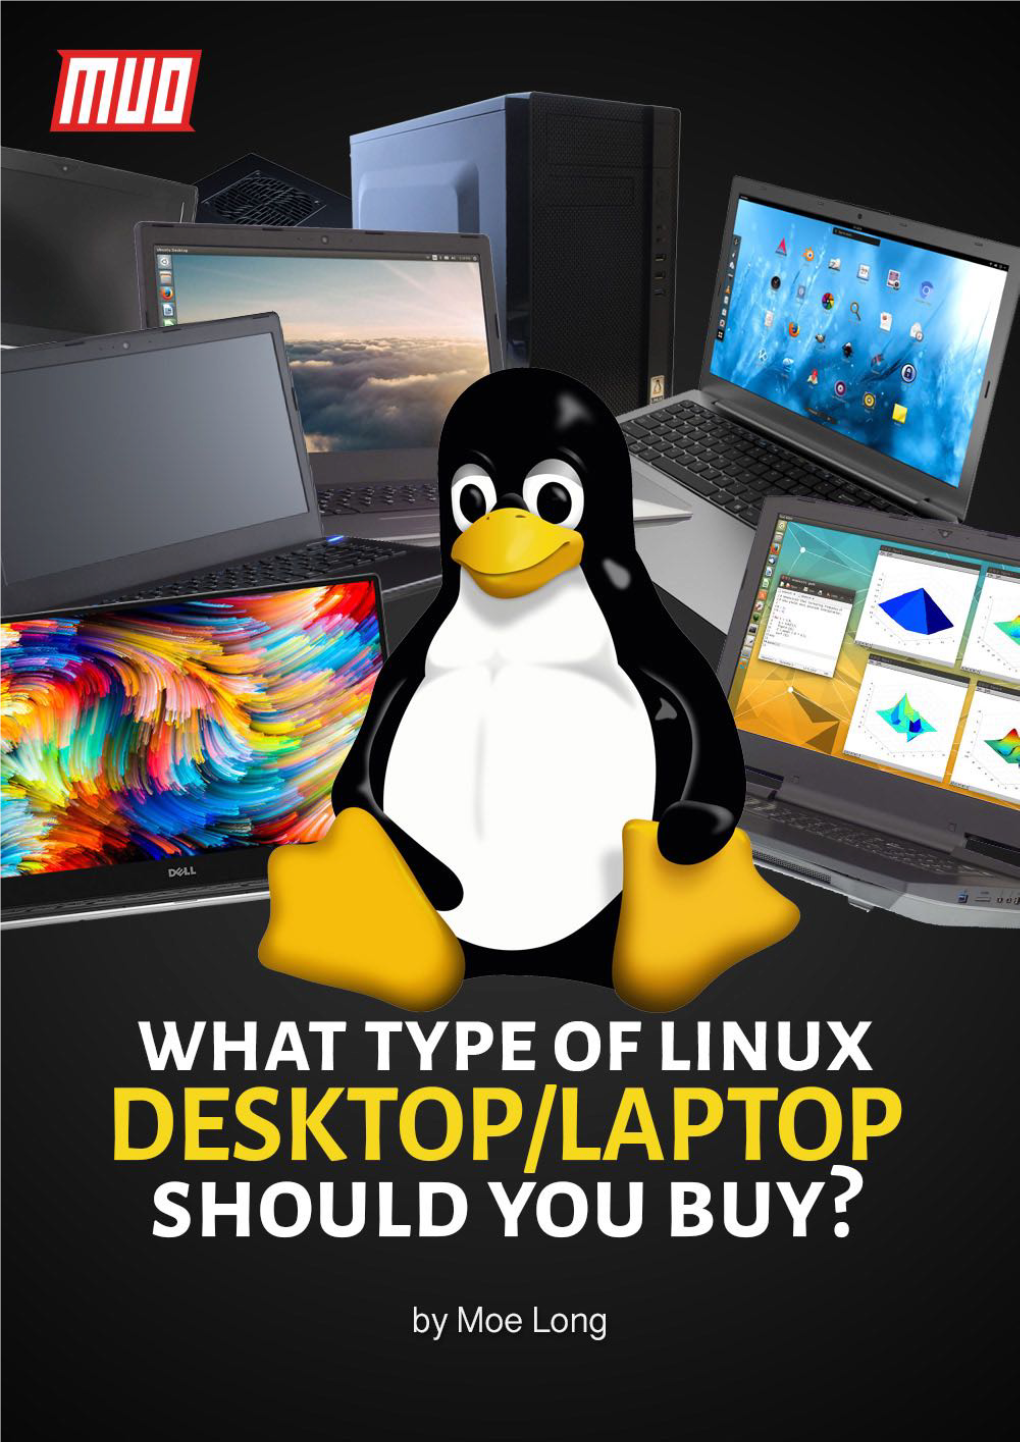 What Type of Linux Desktop Or Laptop Should You Buy?